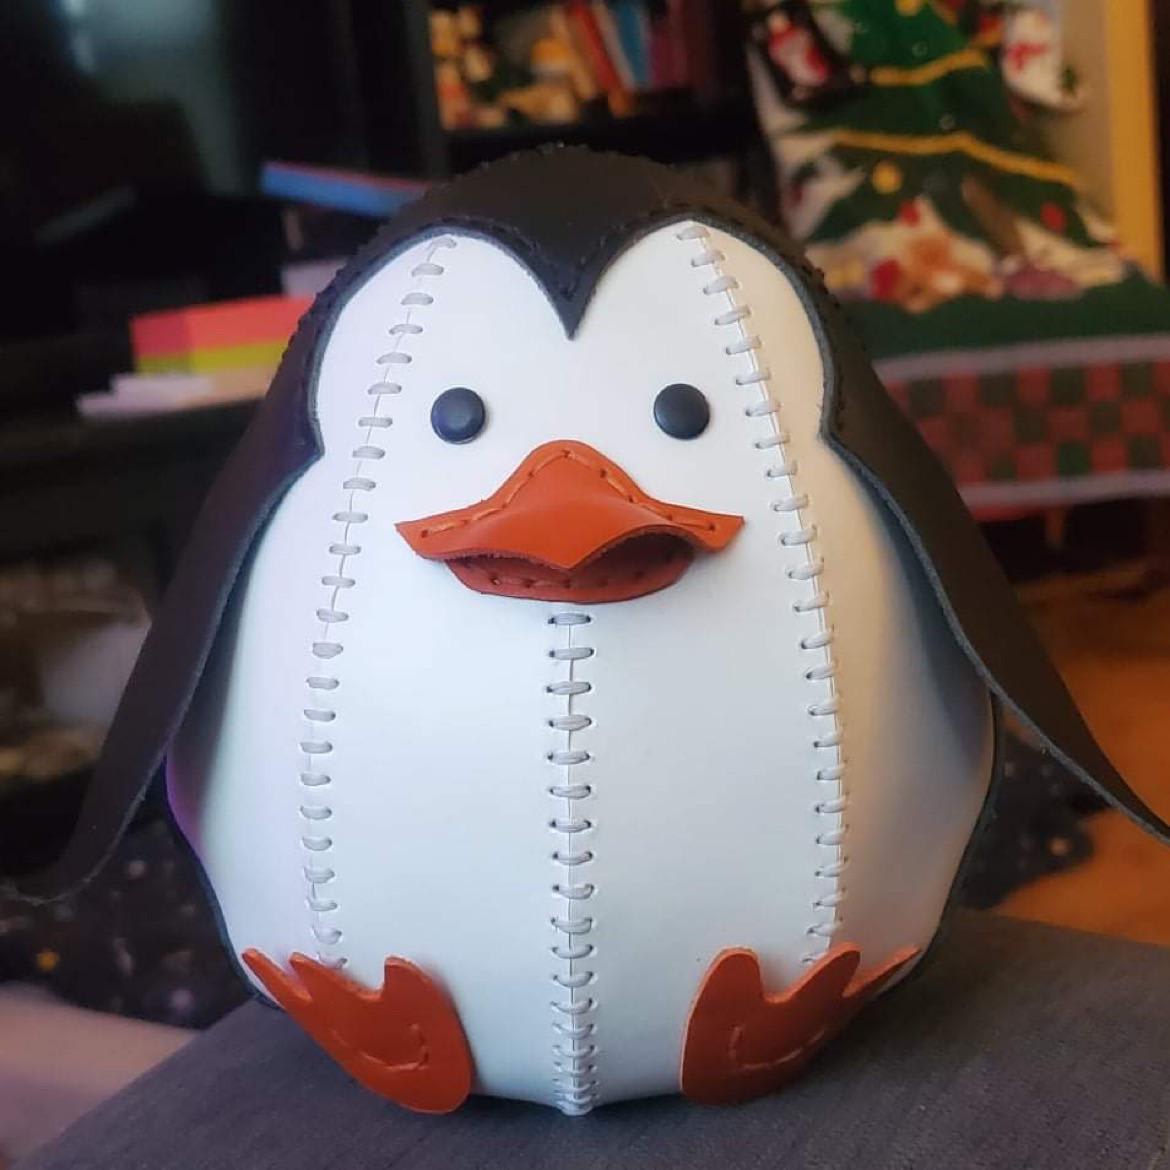 A Christmas gift I made - a leather penguin named Flappy